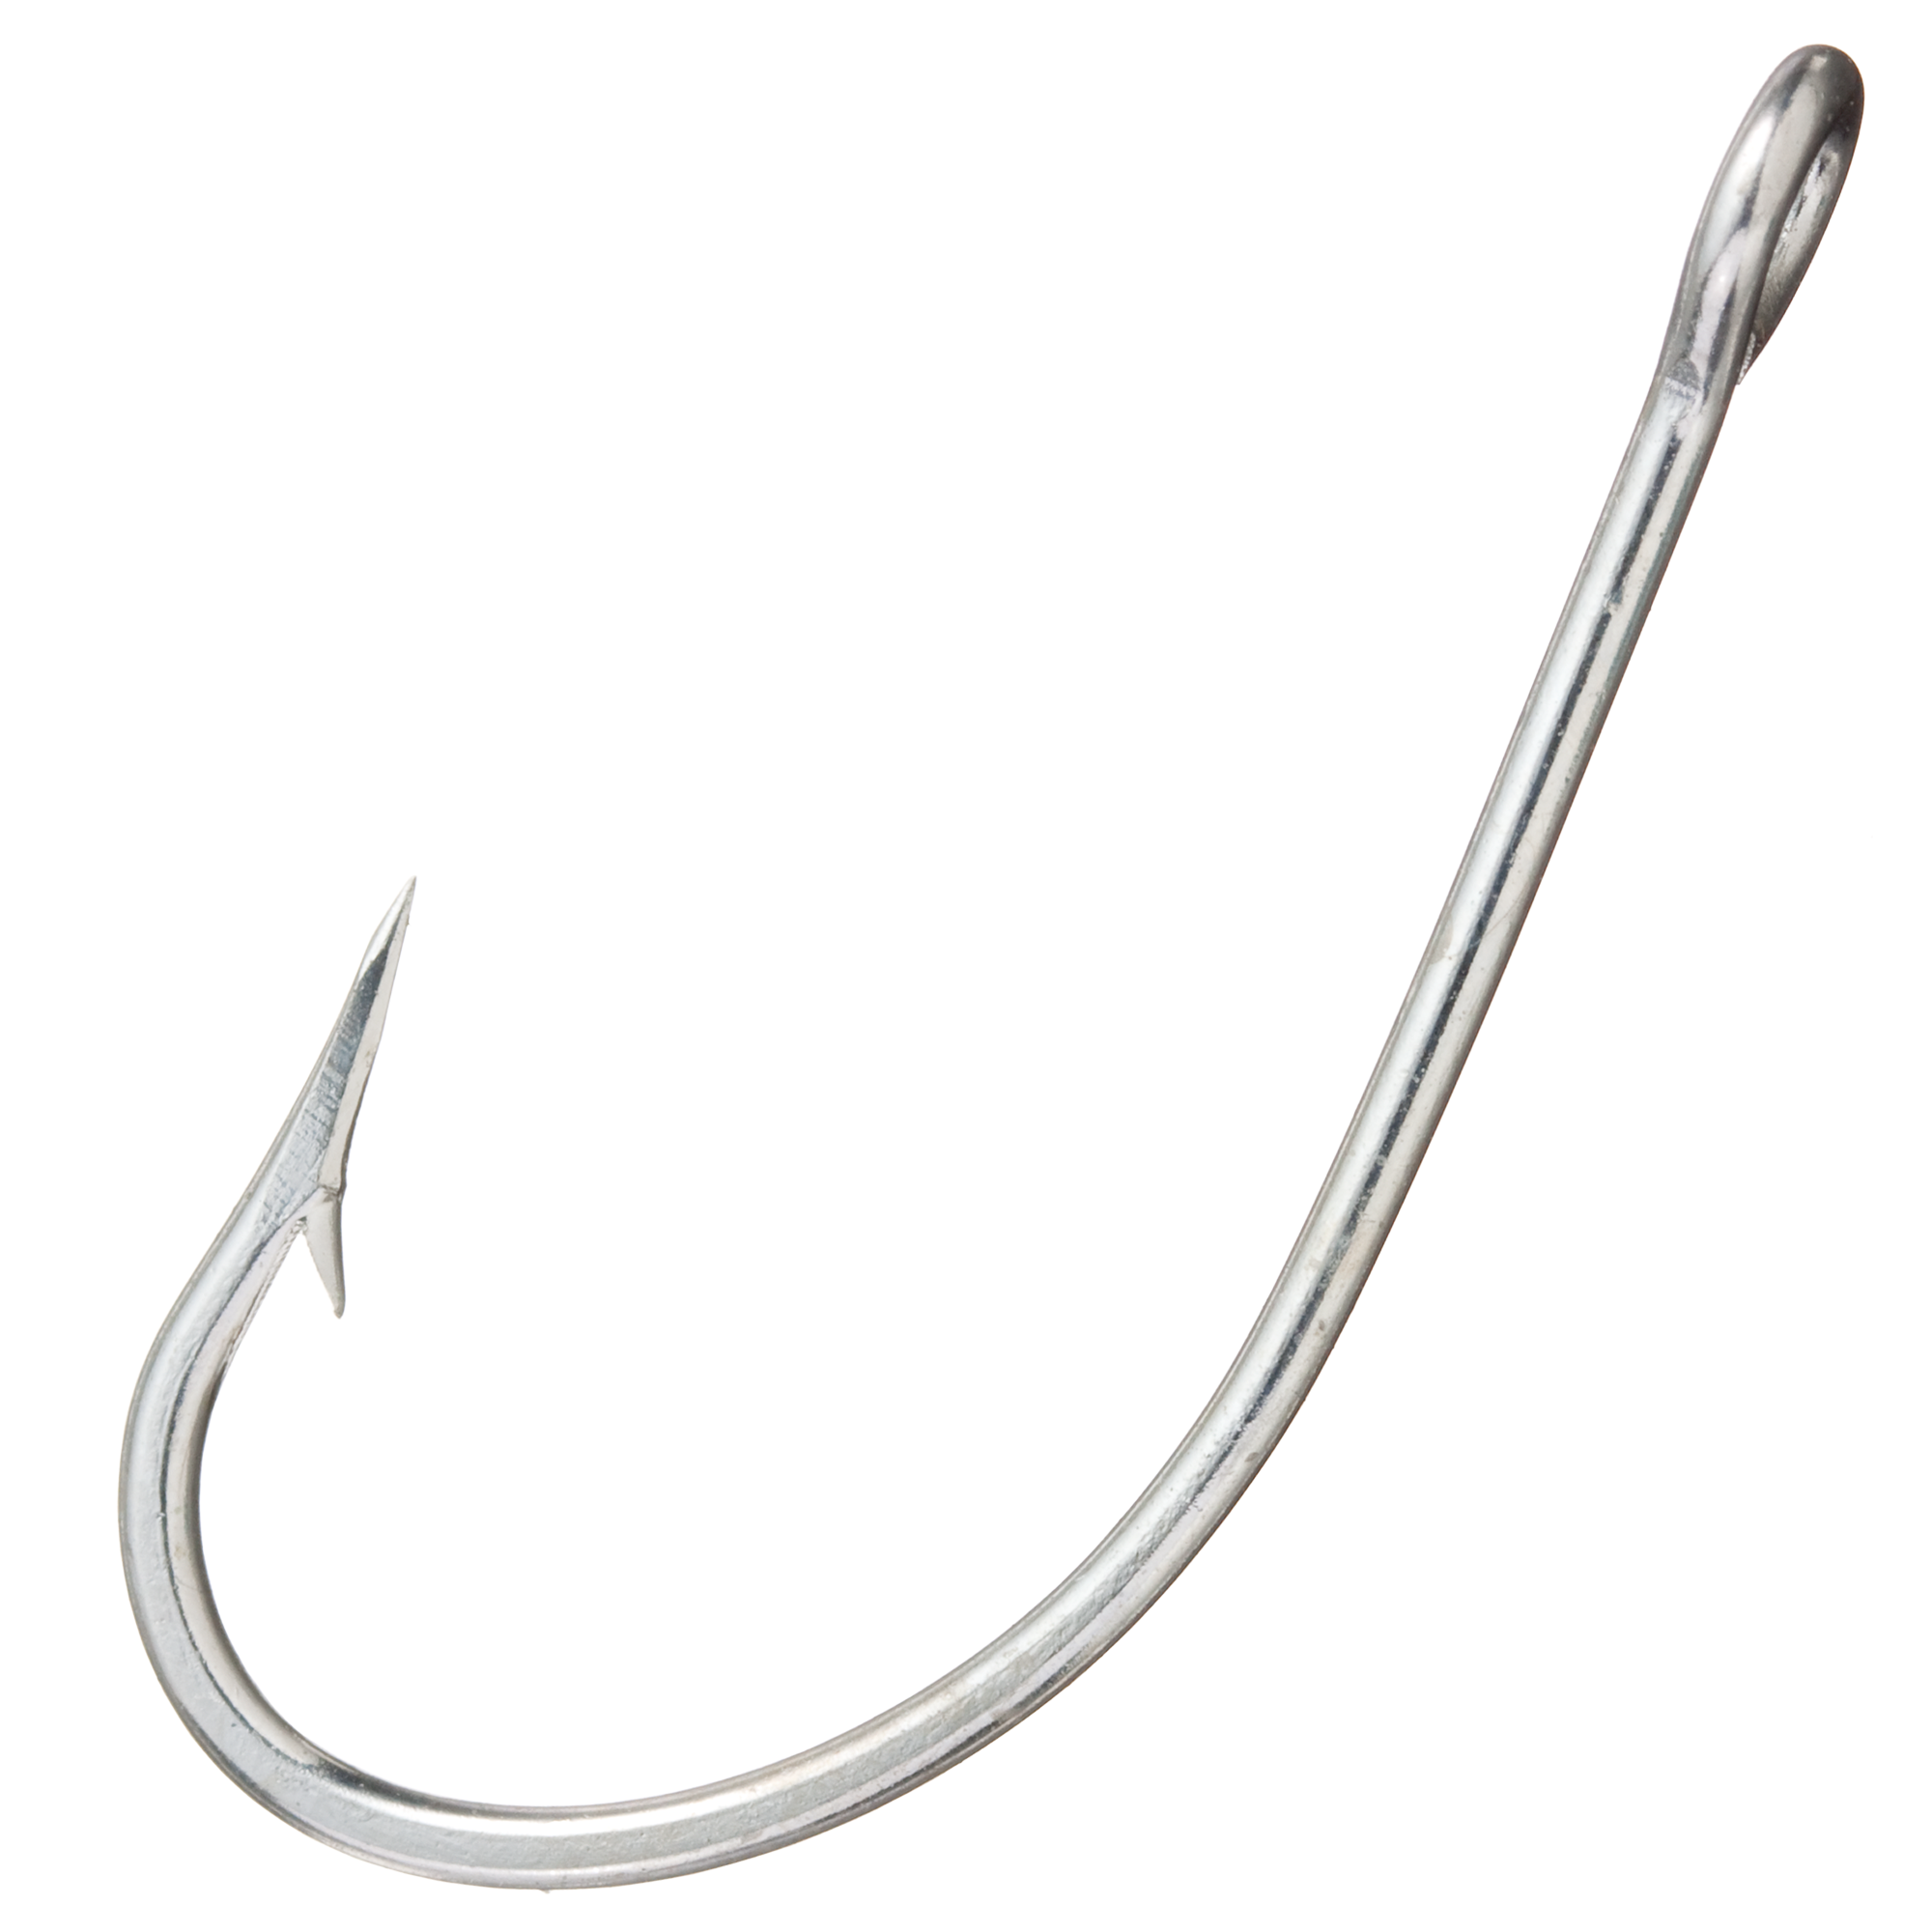 EAGLES Meat Hook, Strong Stainless Steel